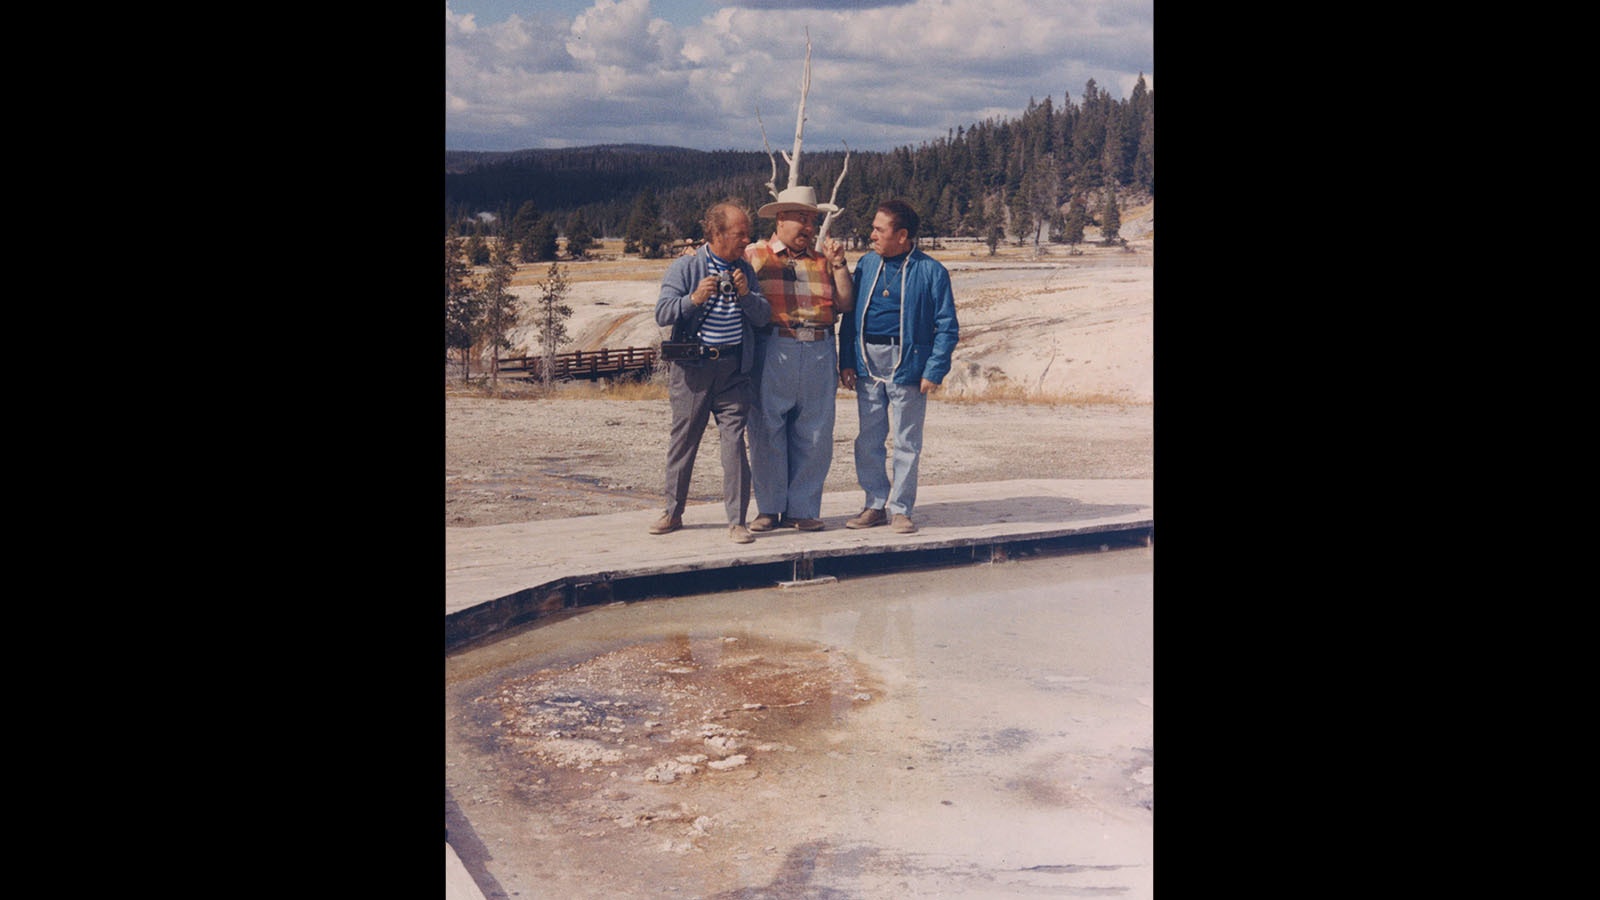 The Three Stooges while filming at Yellowstone's Old Faithful in 1969.